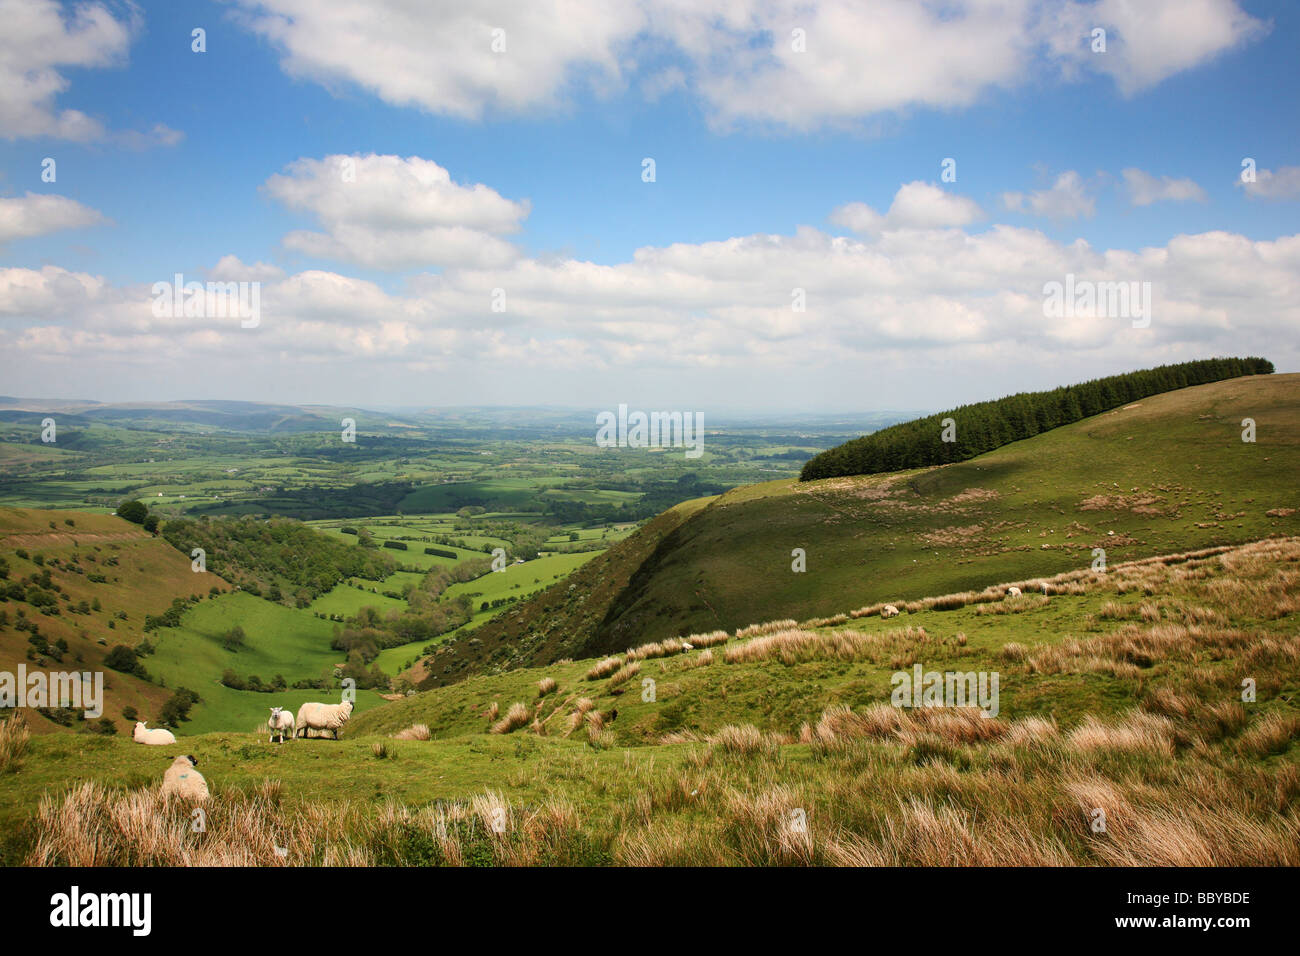 View of the Mid-Wales countryside from viewpoint on Garth Hill near the town of Builth Wells Stock Photo